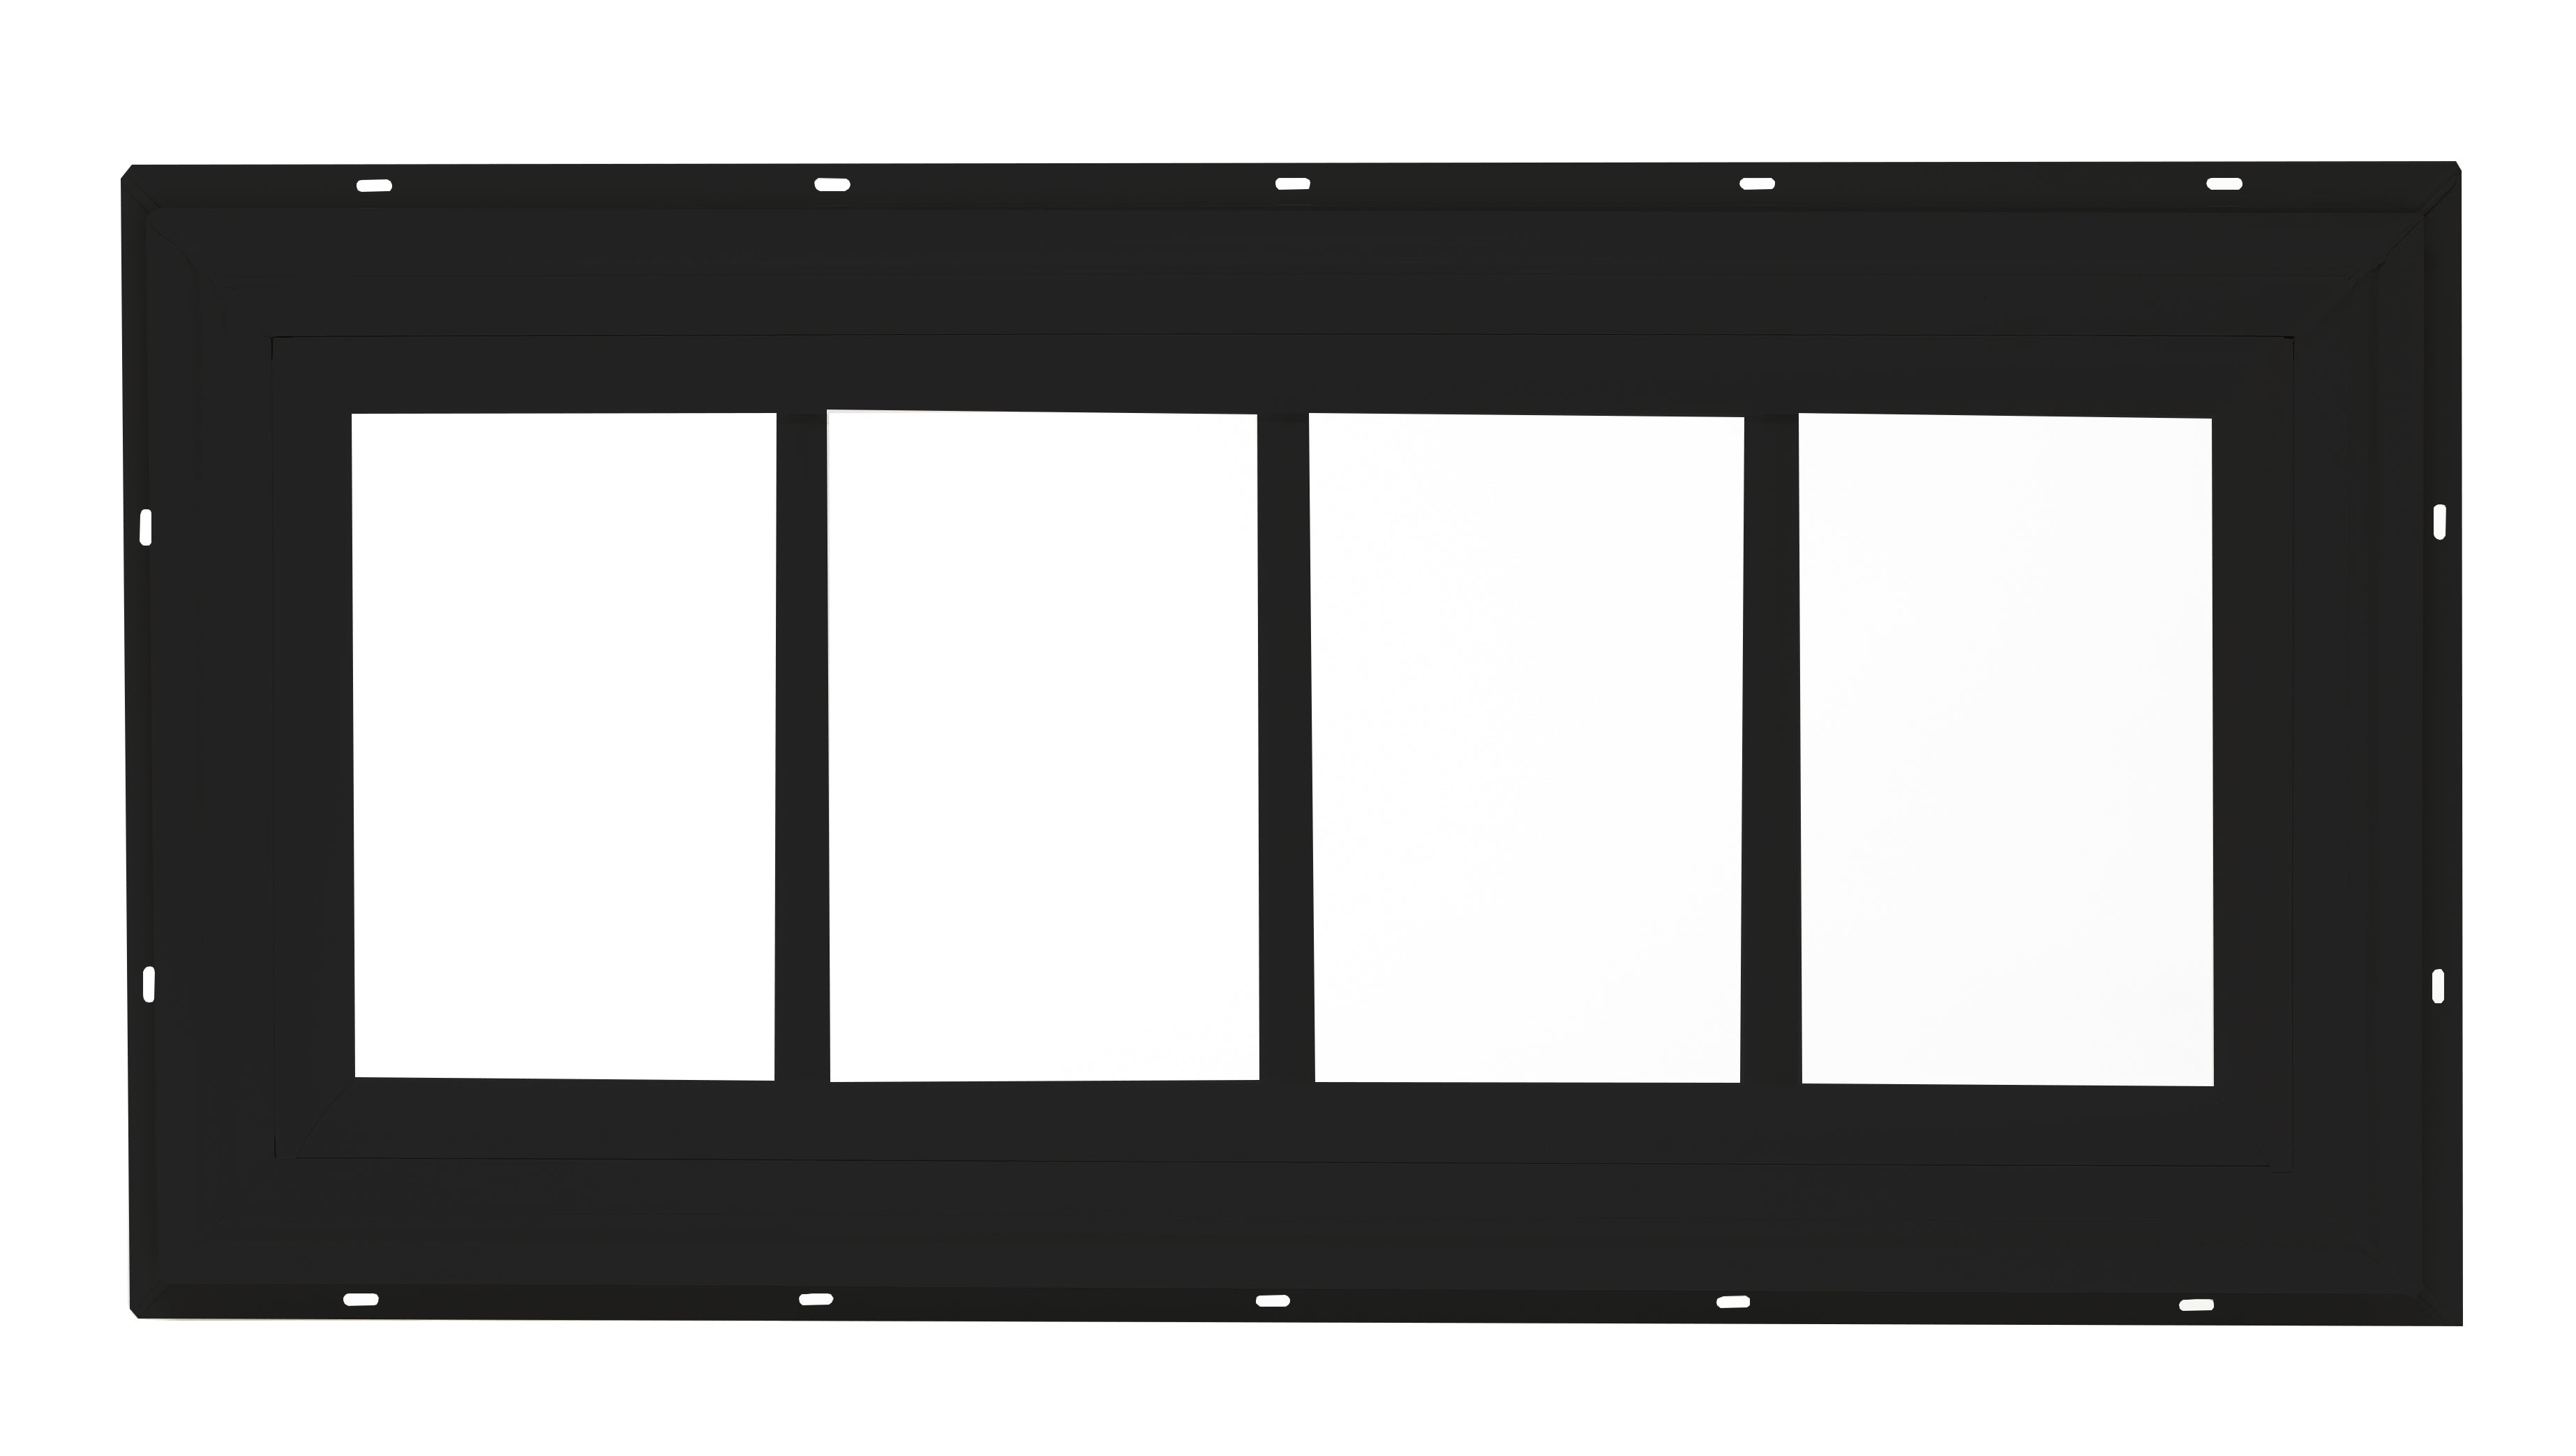 10.185" X 23" Transom J-Lap PVC Window with 3-Panes for Sheds, Playhouses, and MORE 1 PK BLACK SHED WINDOW